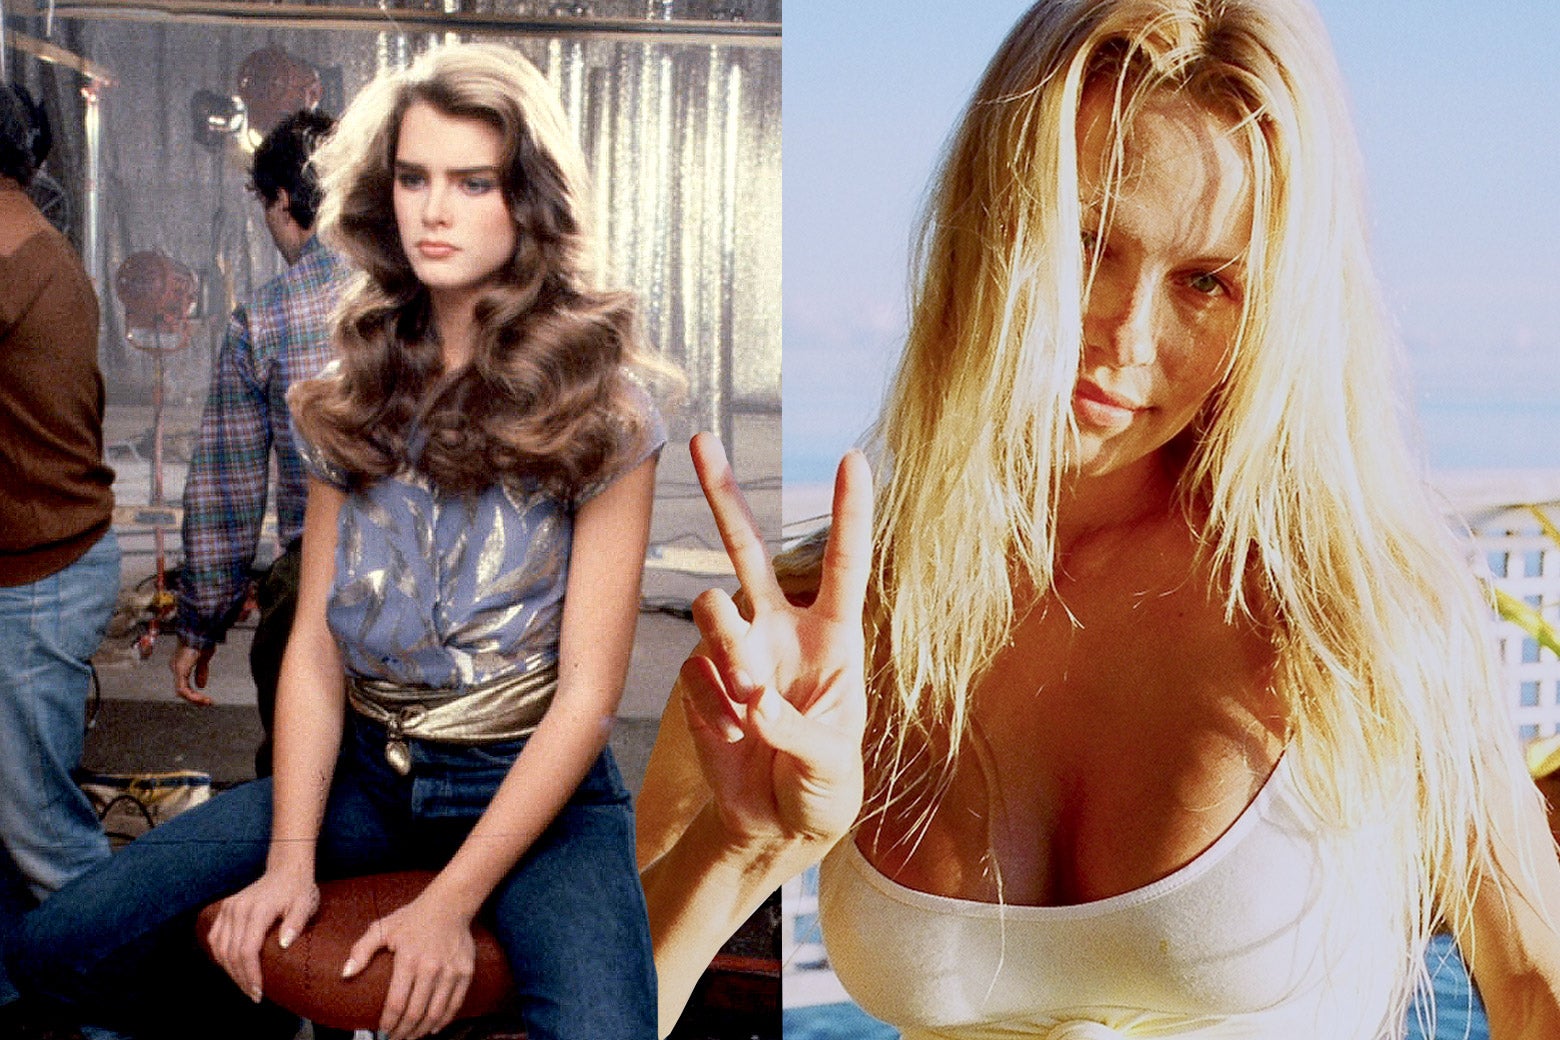 On the left a young Shields in jeans and long brown curly hair sits on a stool. On the right, Pamela Anderson in long blonde hair and a white top holds up a peace sign.